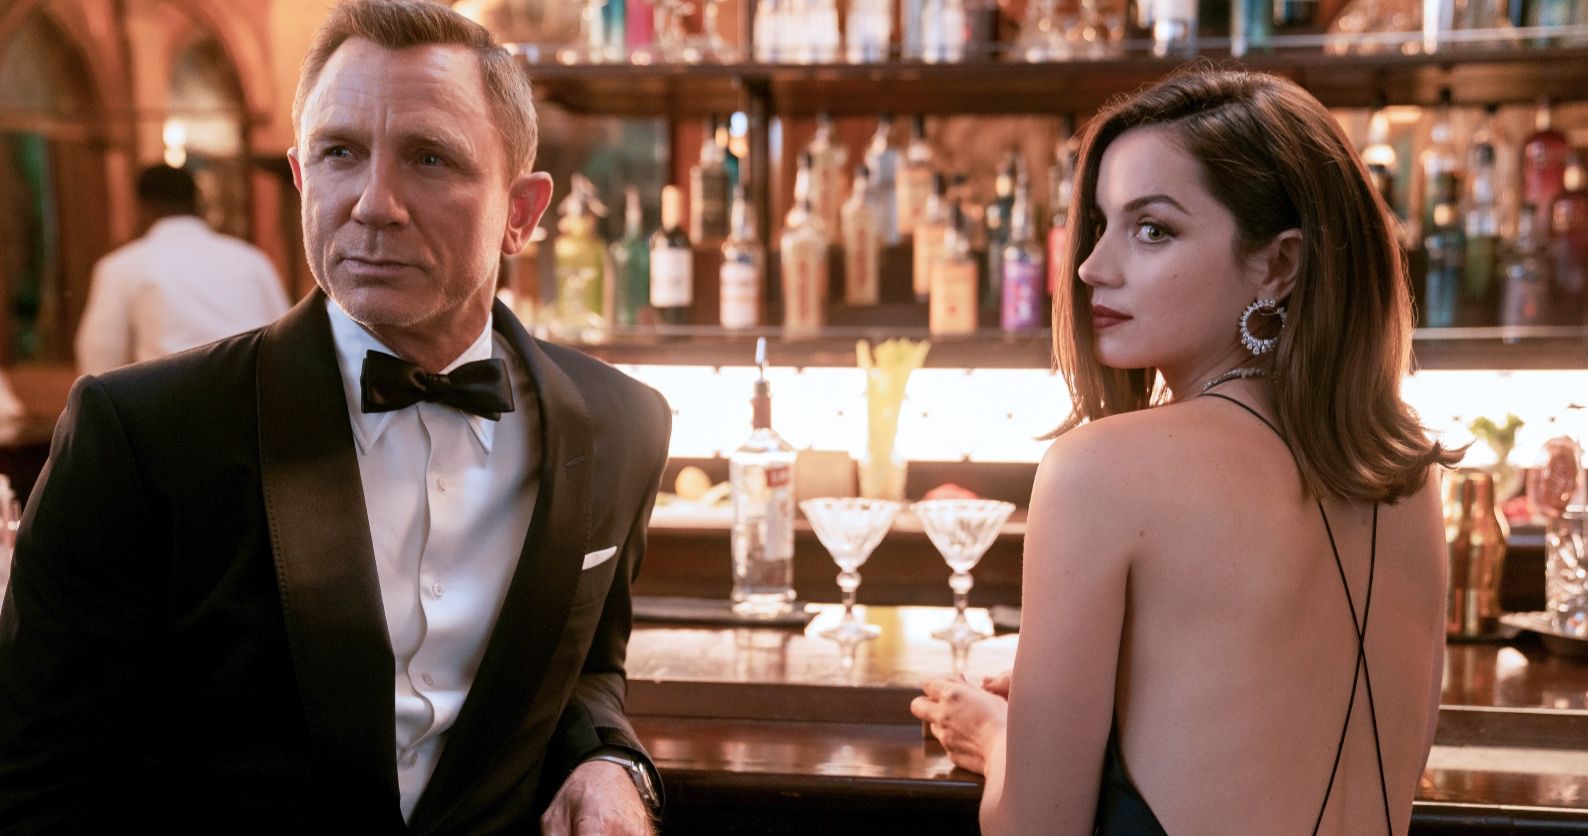 New No Time to Die Trailer Has Daniel Craig's James Bond Back in Action After Delay